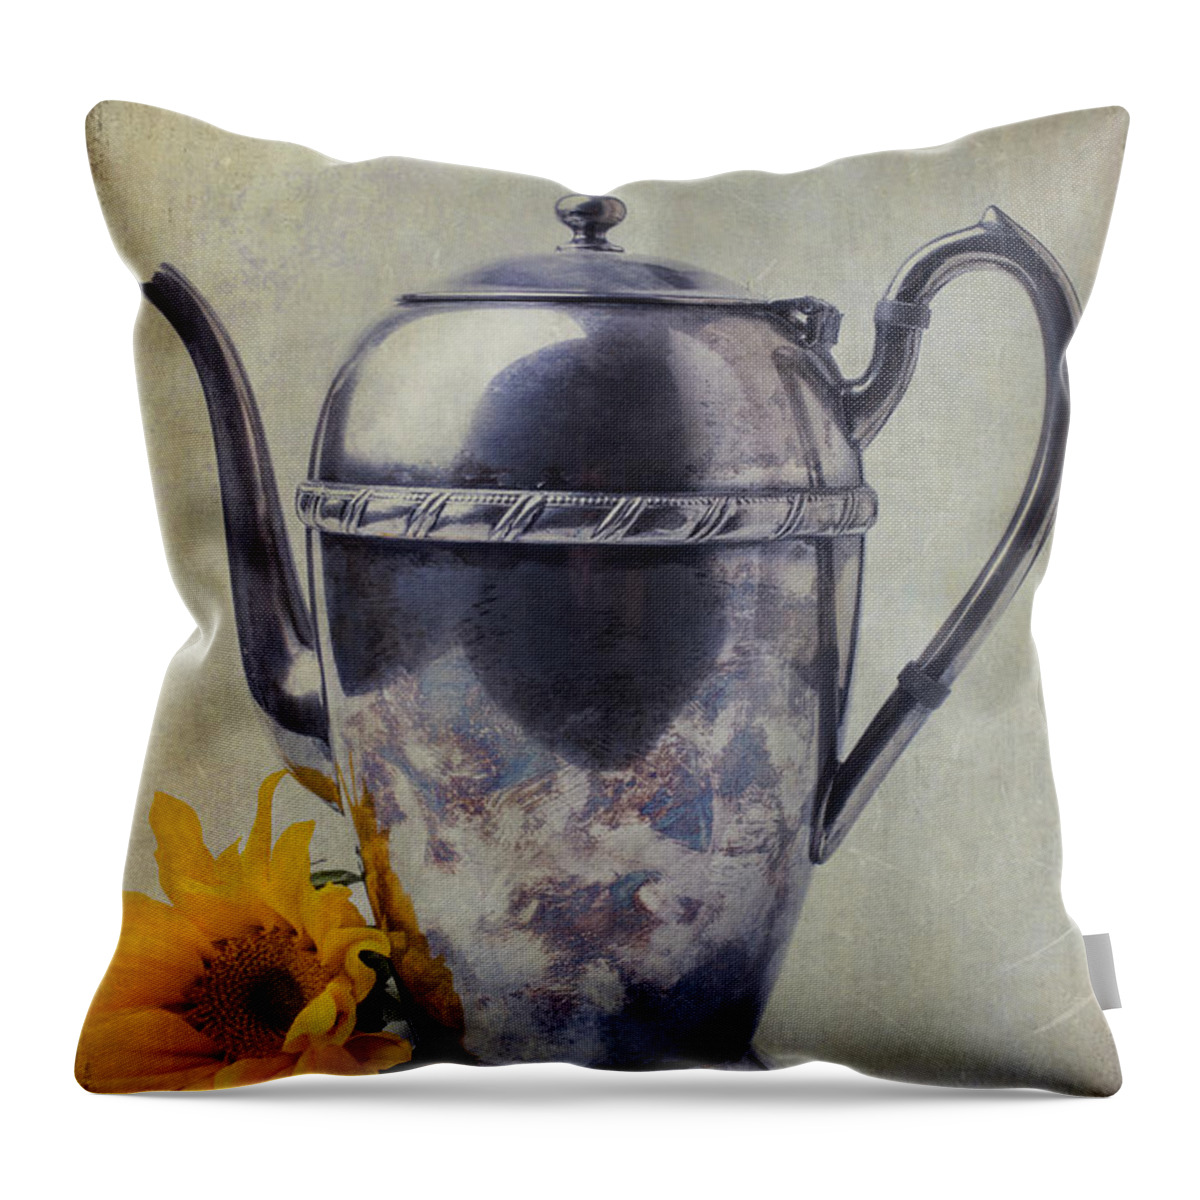 Teapot Throw Pillow featuring the photograph Old Teapot With Sunflower by Garry Gay